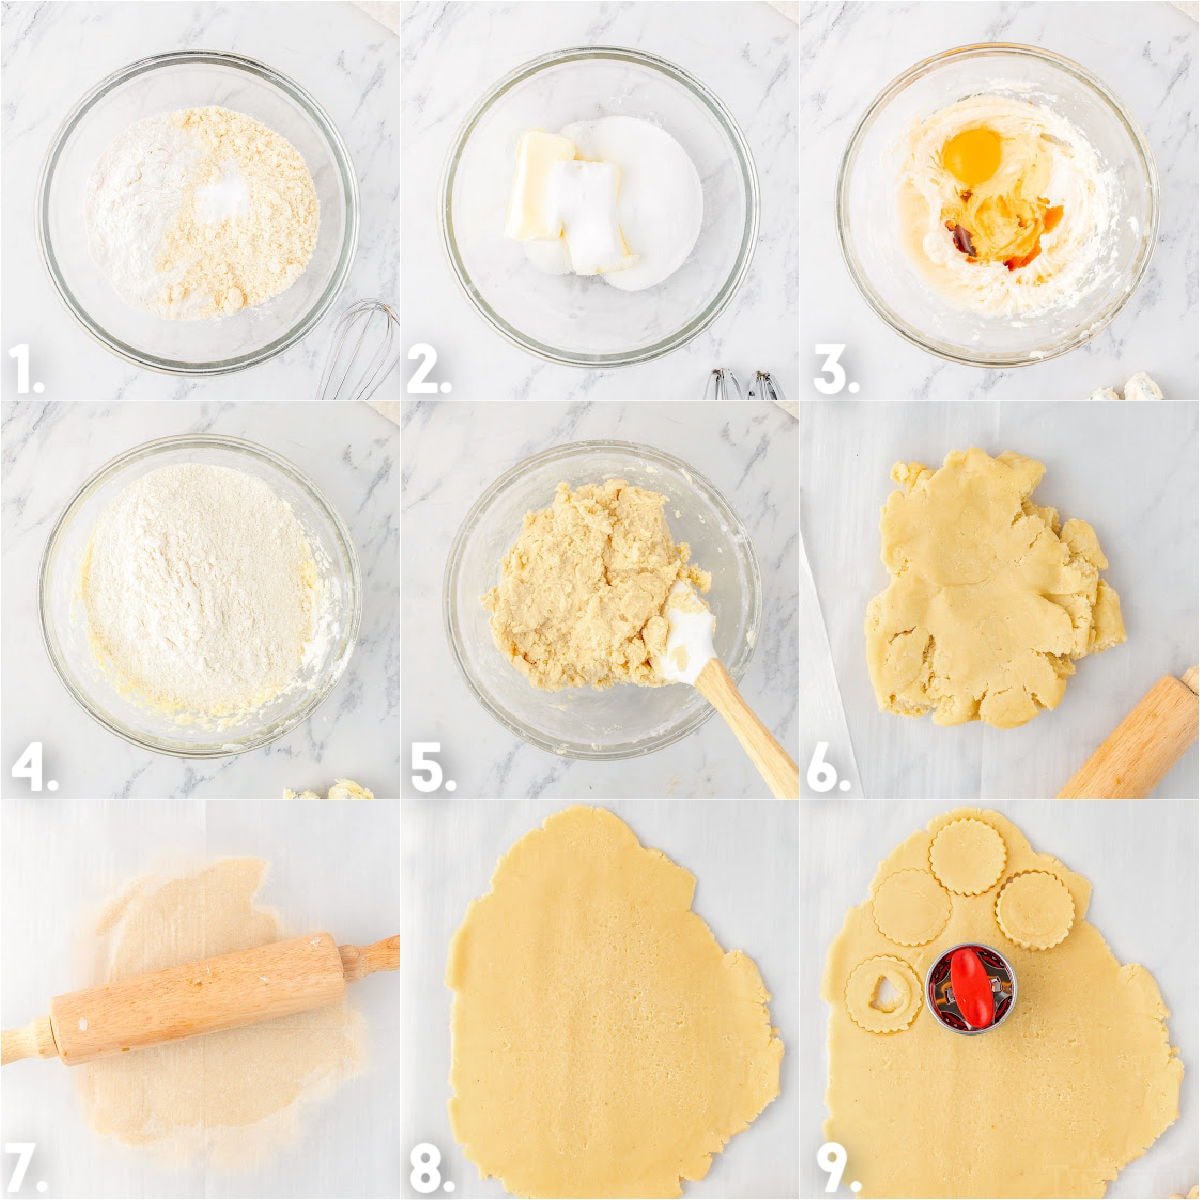 nine image collage showing step by step how to make linzer cookies including cutting them out.